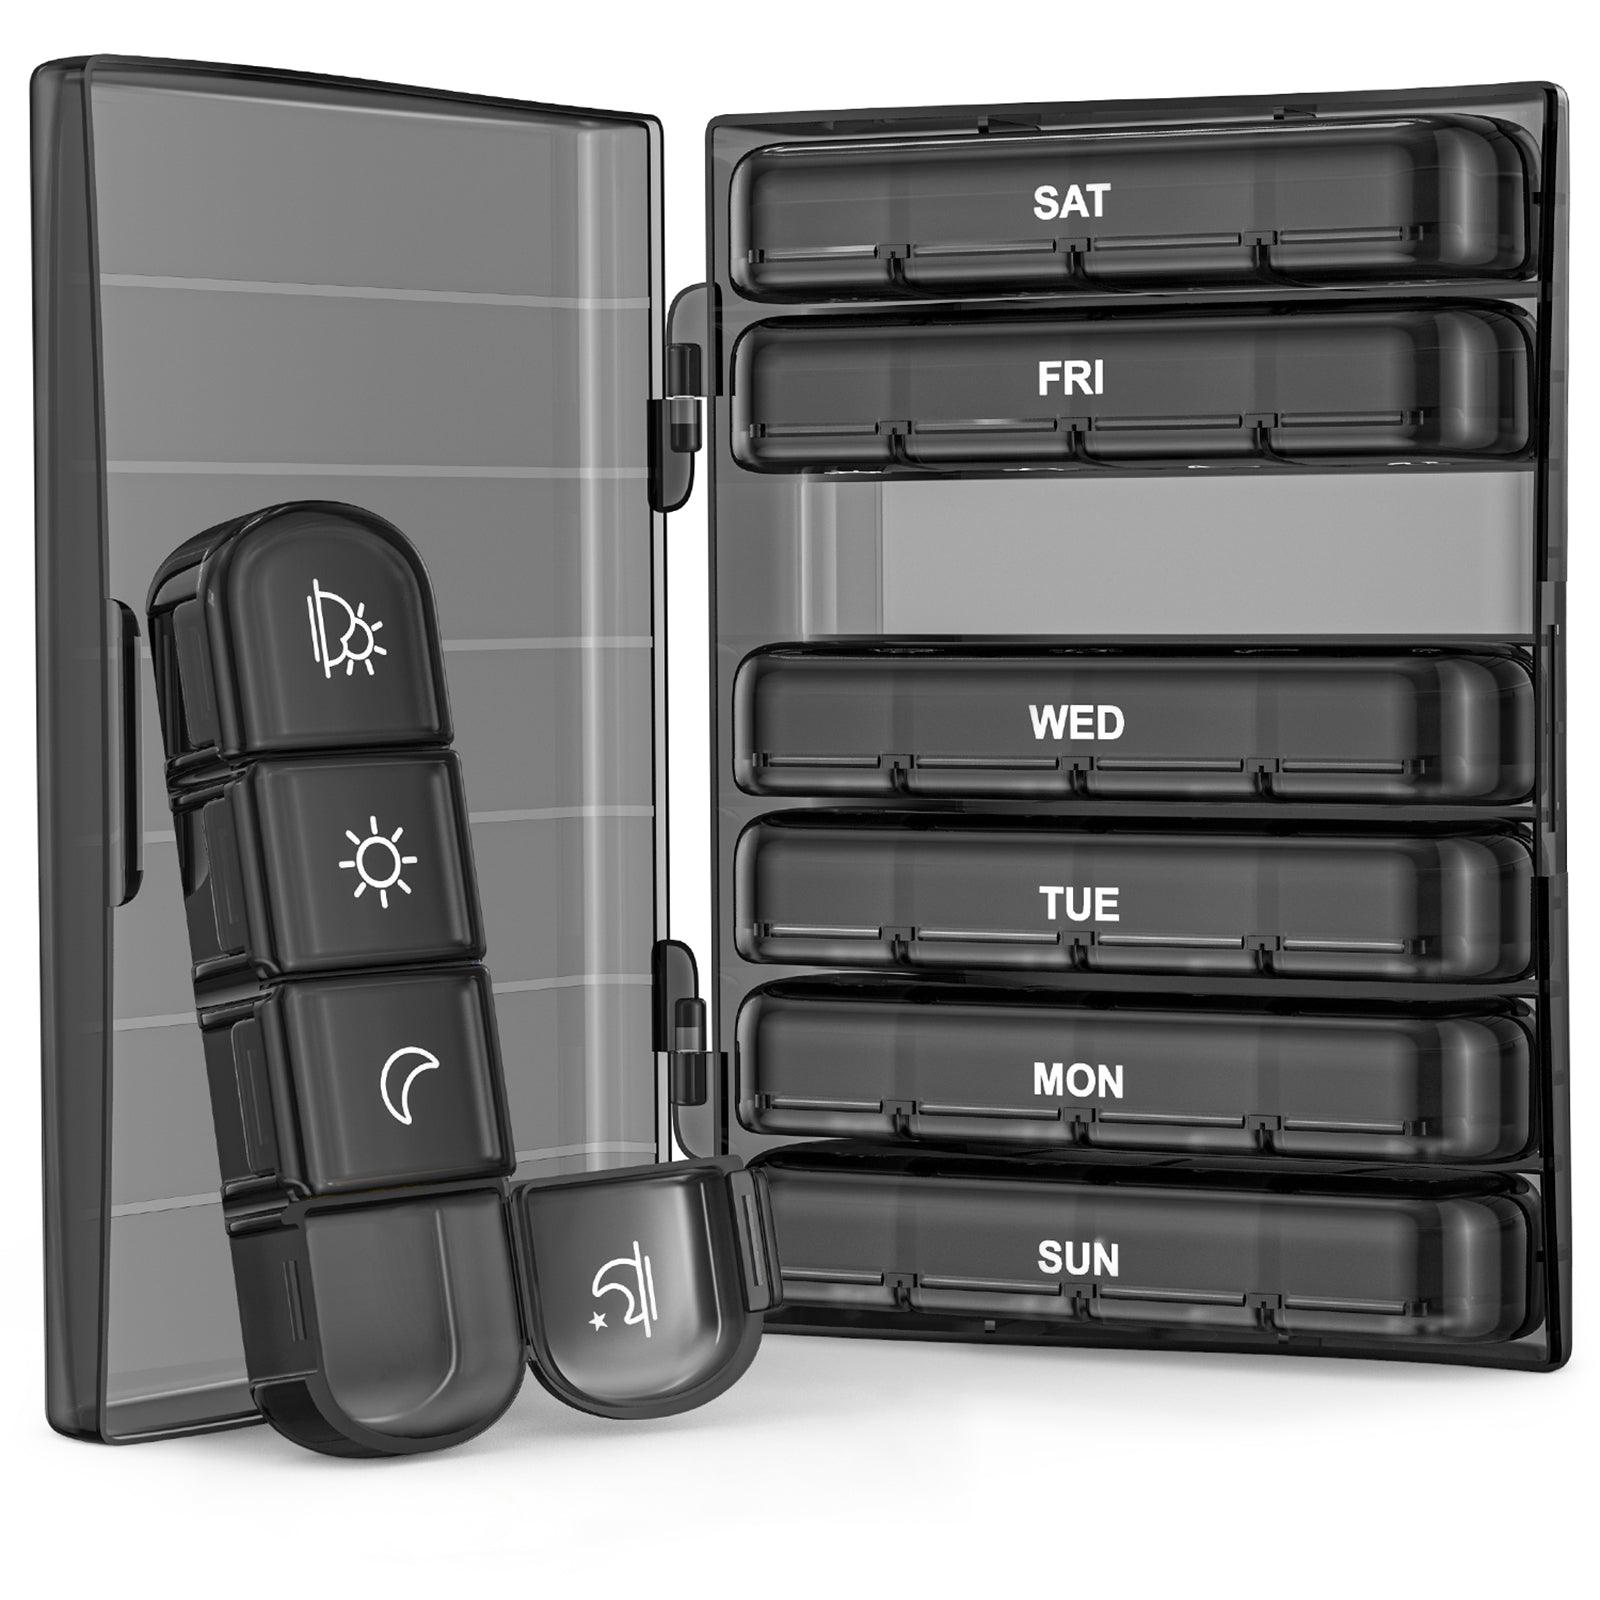 Pill Box 7 Day, Weekly Pill Organizer 3 Times A Day, Including 7 Individual  Daily Pill Cases, Portable Travel Medicine Organizer for Holding Medication/Vitamin/Fish  Oil/Supplements, BPA Free 